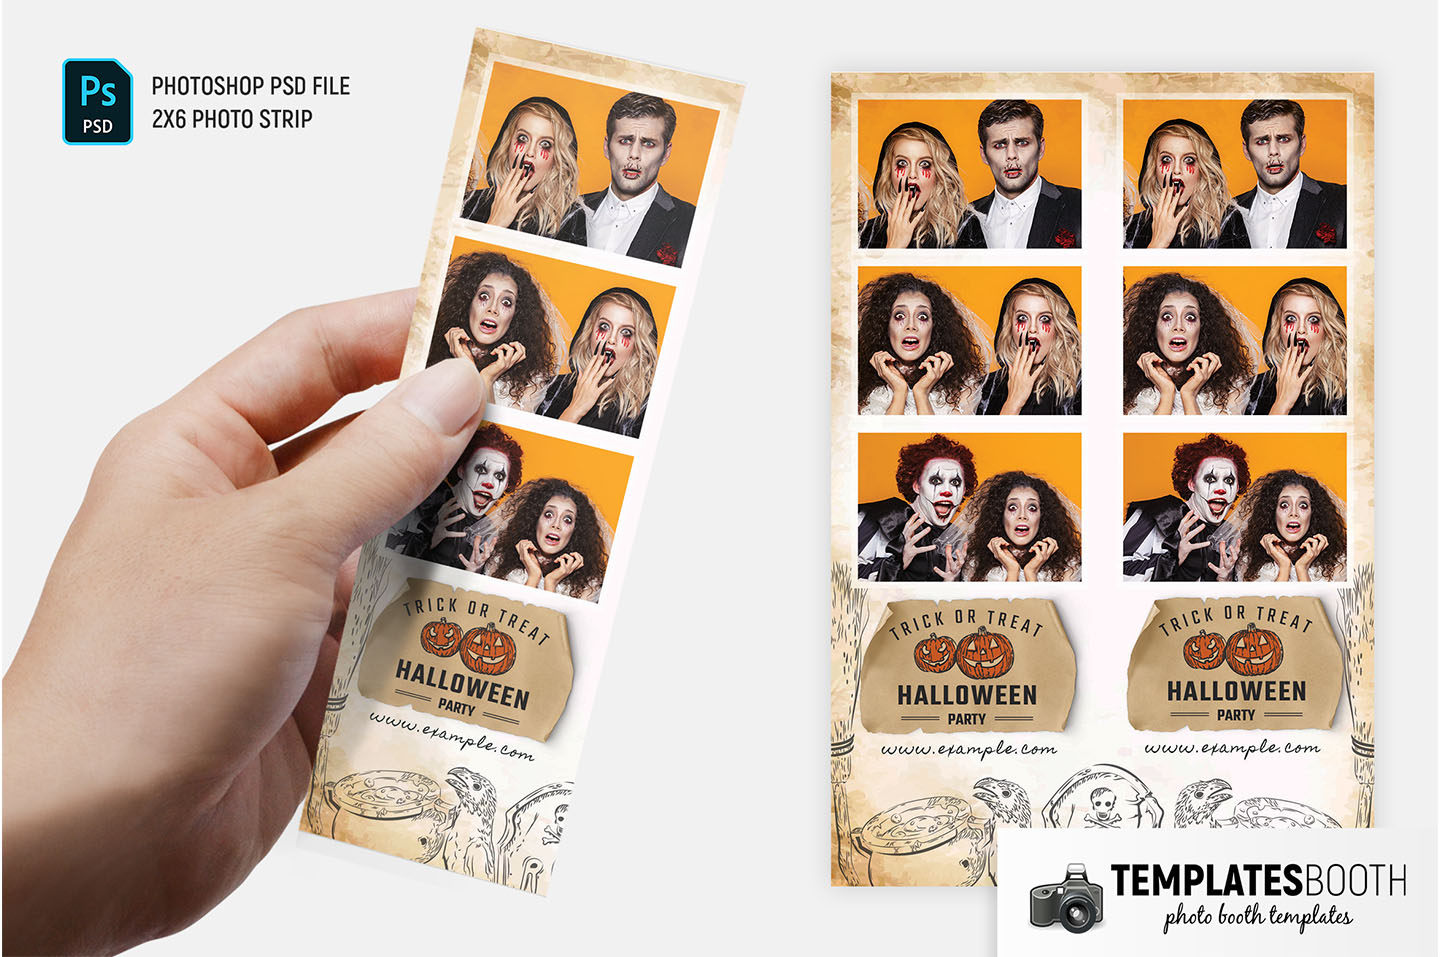 Worn Paper Halloween Photo Booth Template